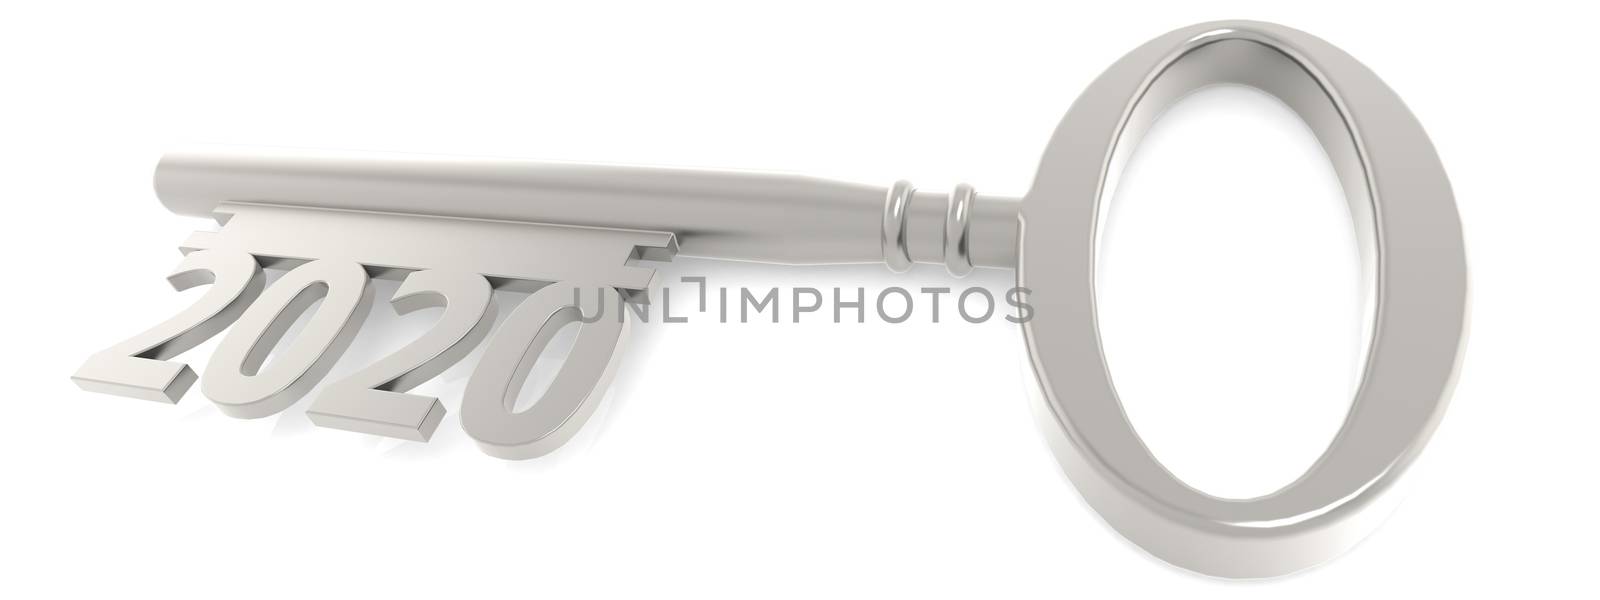 Vintage Key with 2020 year Sign on a white background by tang90246